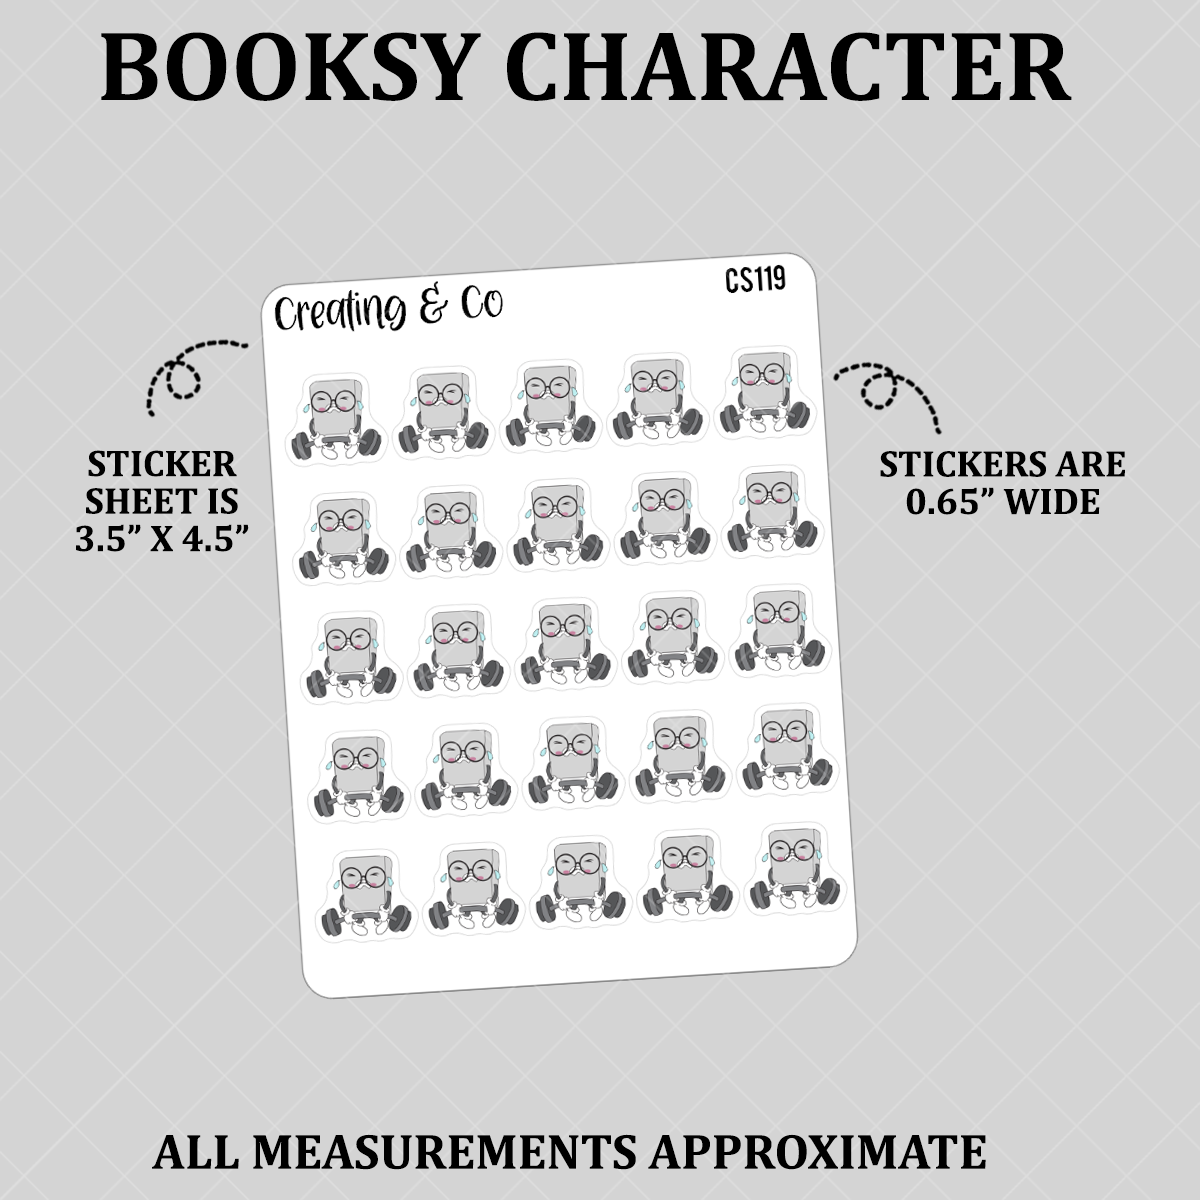 Strength Training, Lifting Weights Booksy Character Functional Stickers - CS119